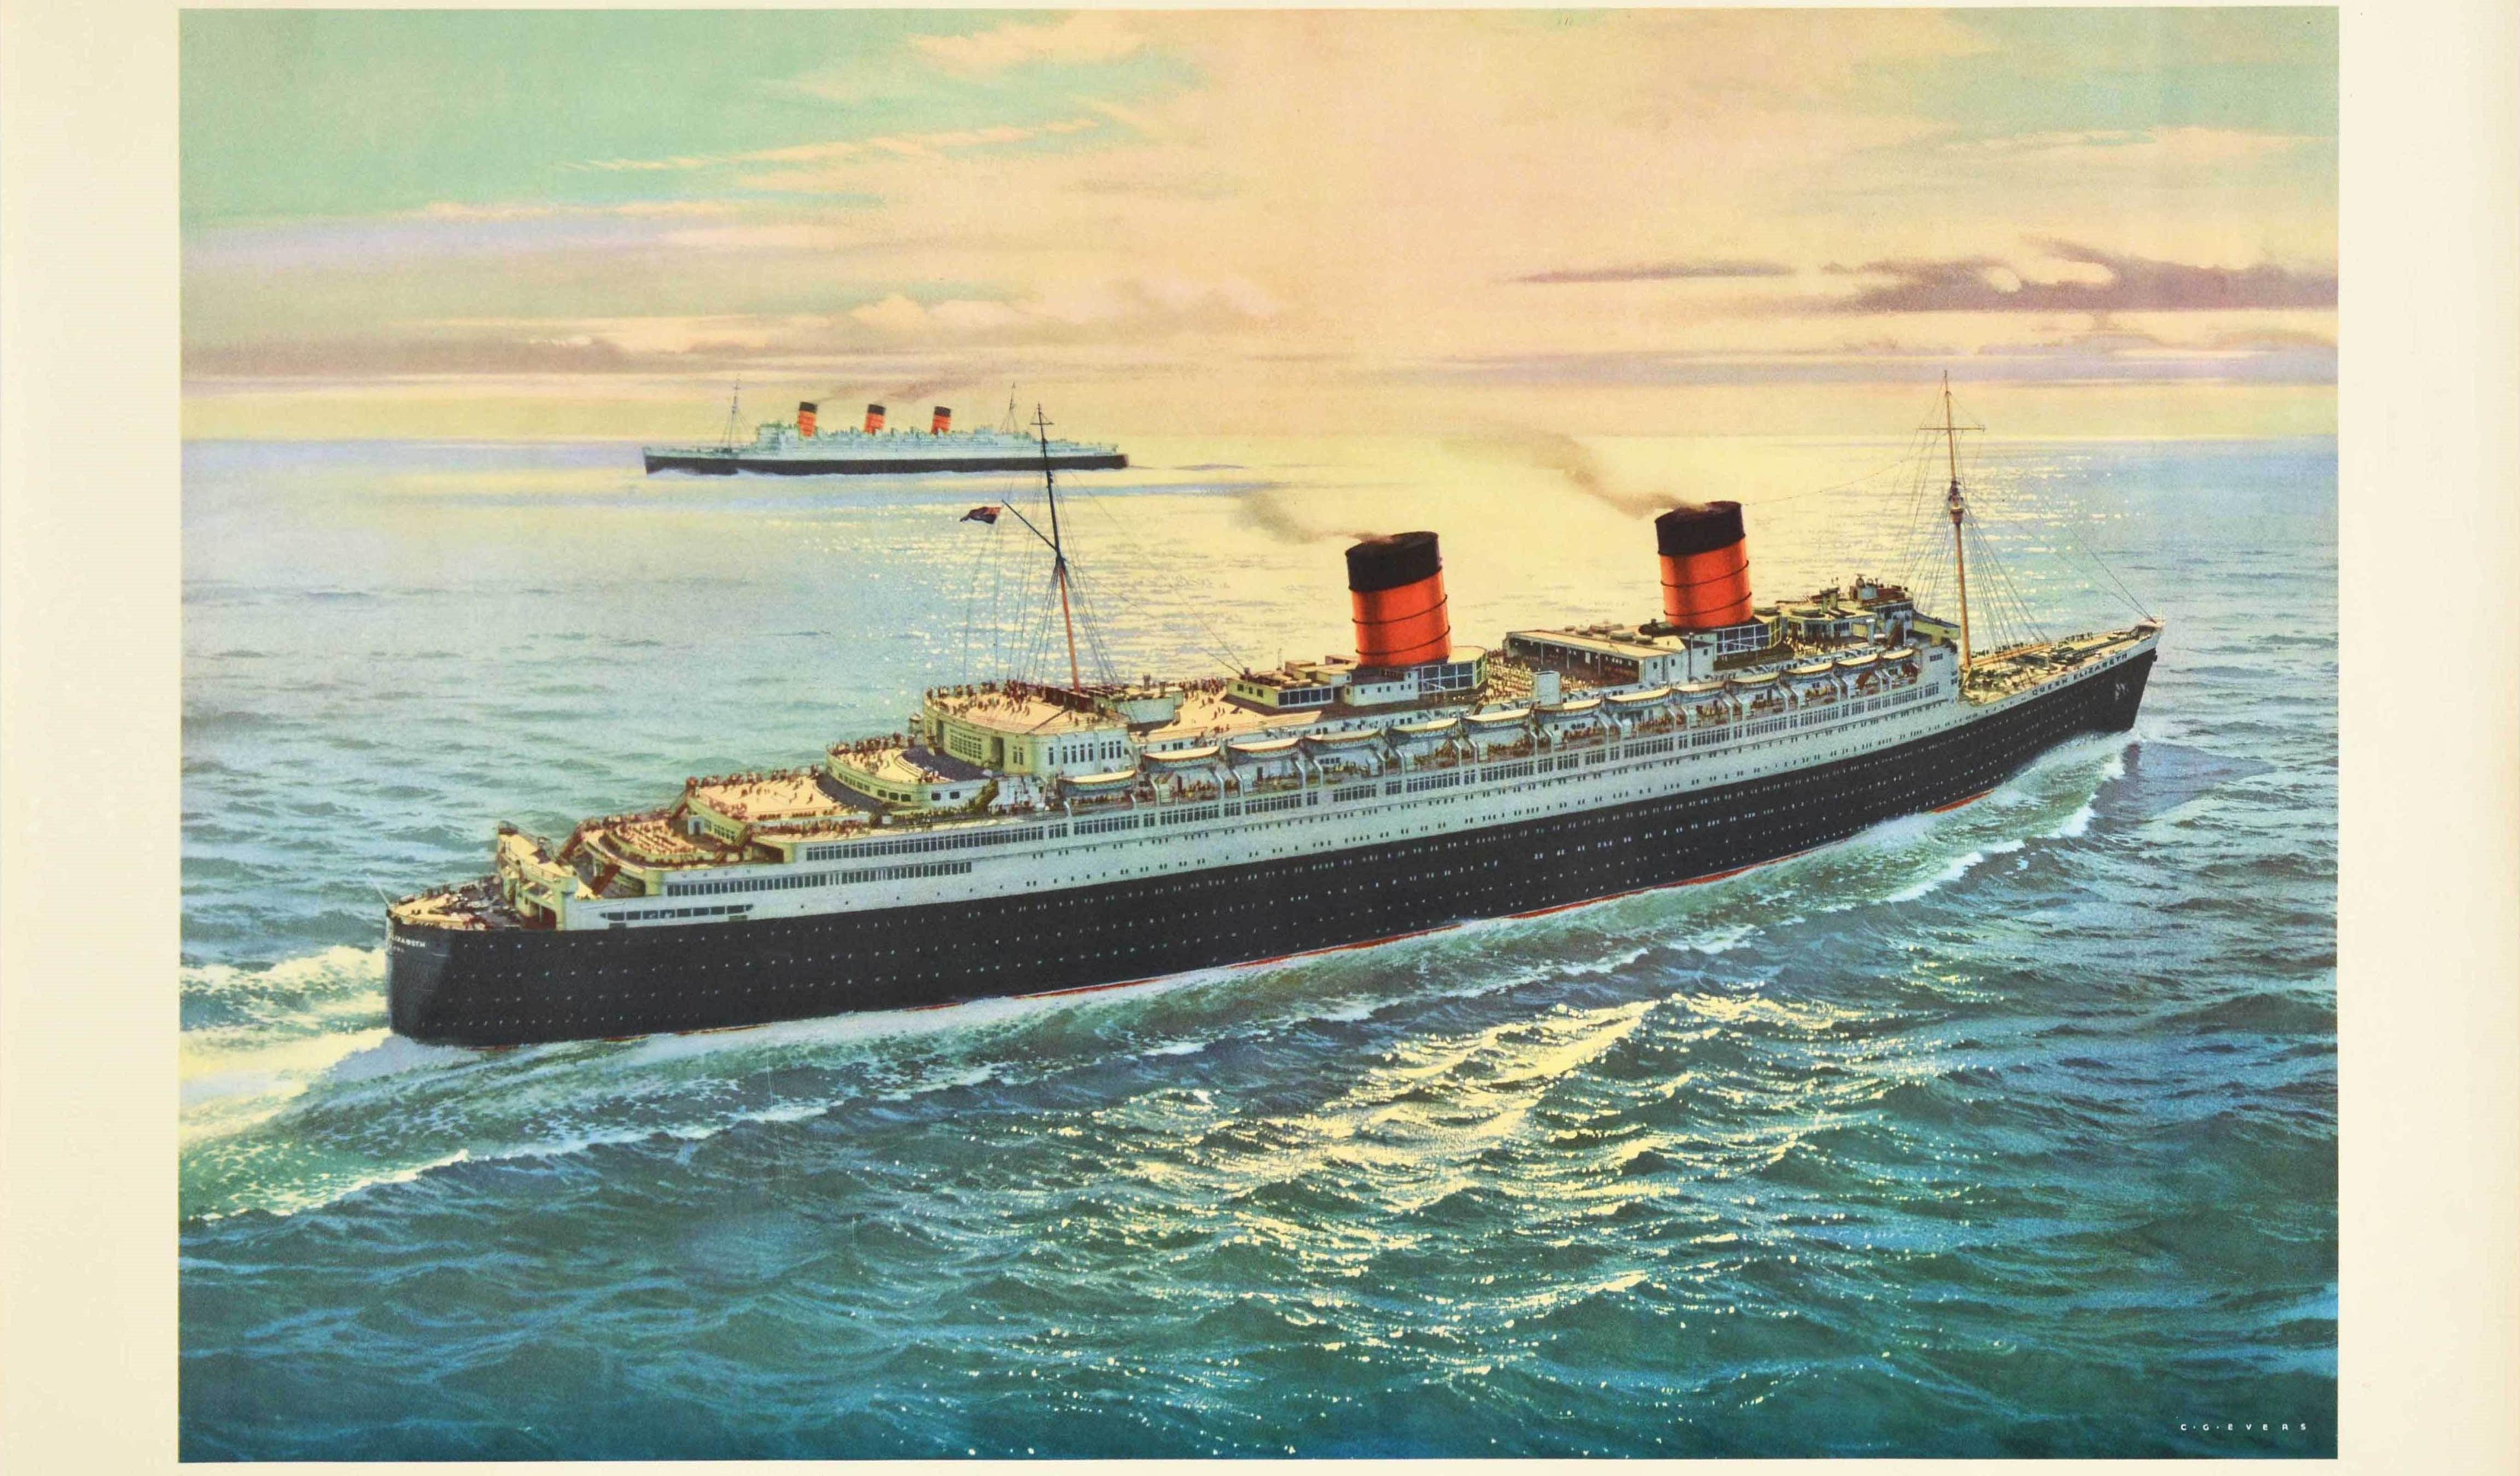 Original Vintage Poster Queen Elizabeth Queen Mary Cunard Line Cruise Travel Art - Print by Carl G. Evers